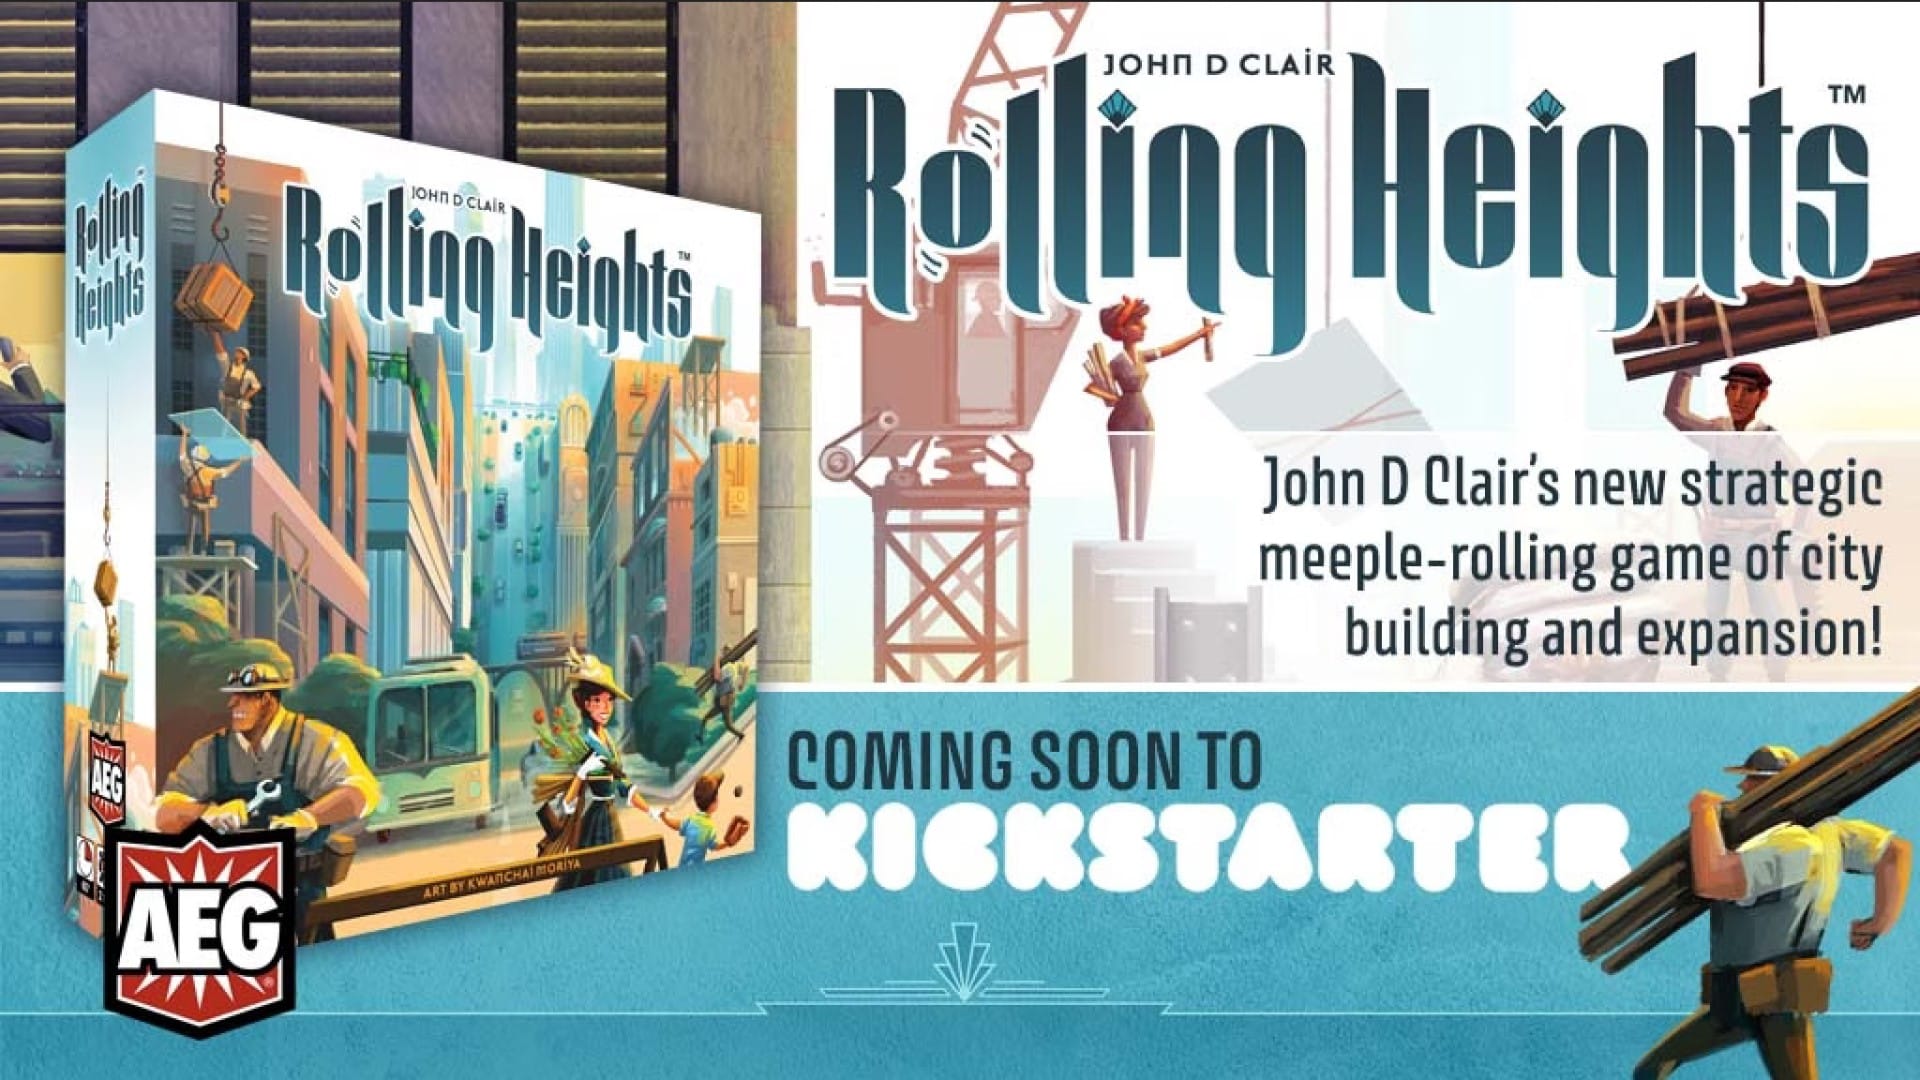 The featured artwork for Rolling Heights